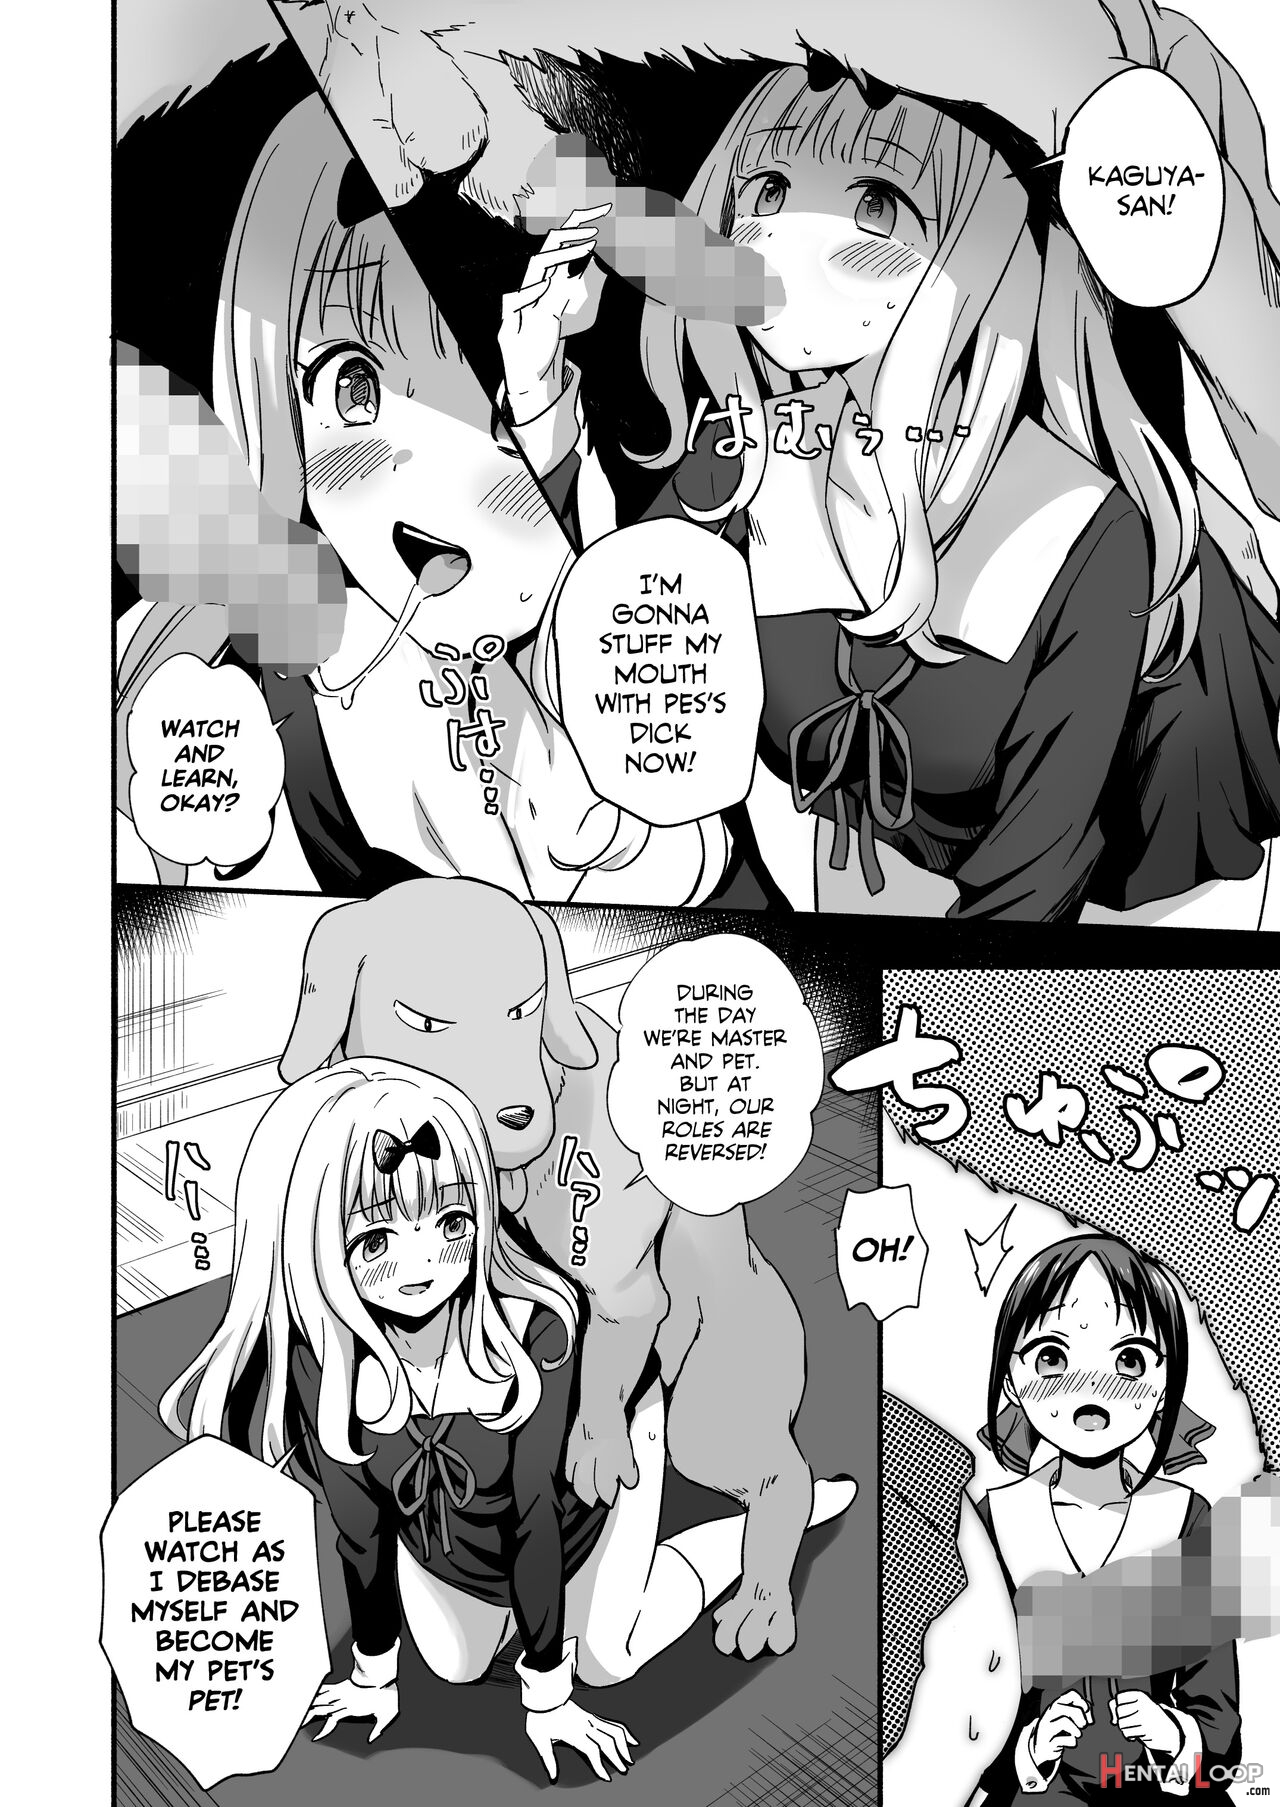 Kaguya-san Takes Care Of Pes's Sexual Urges! page 6